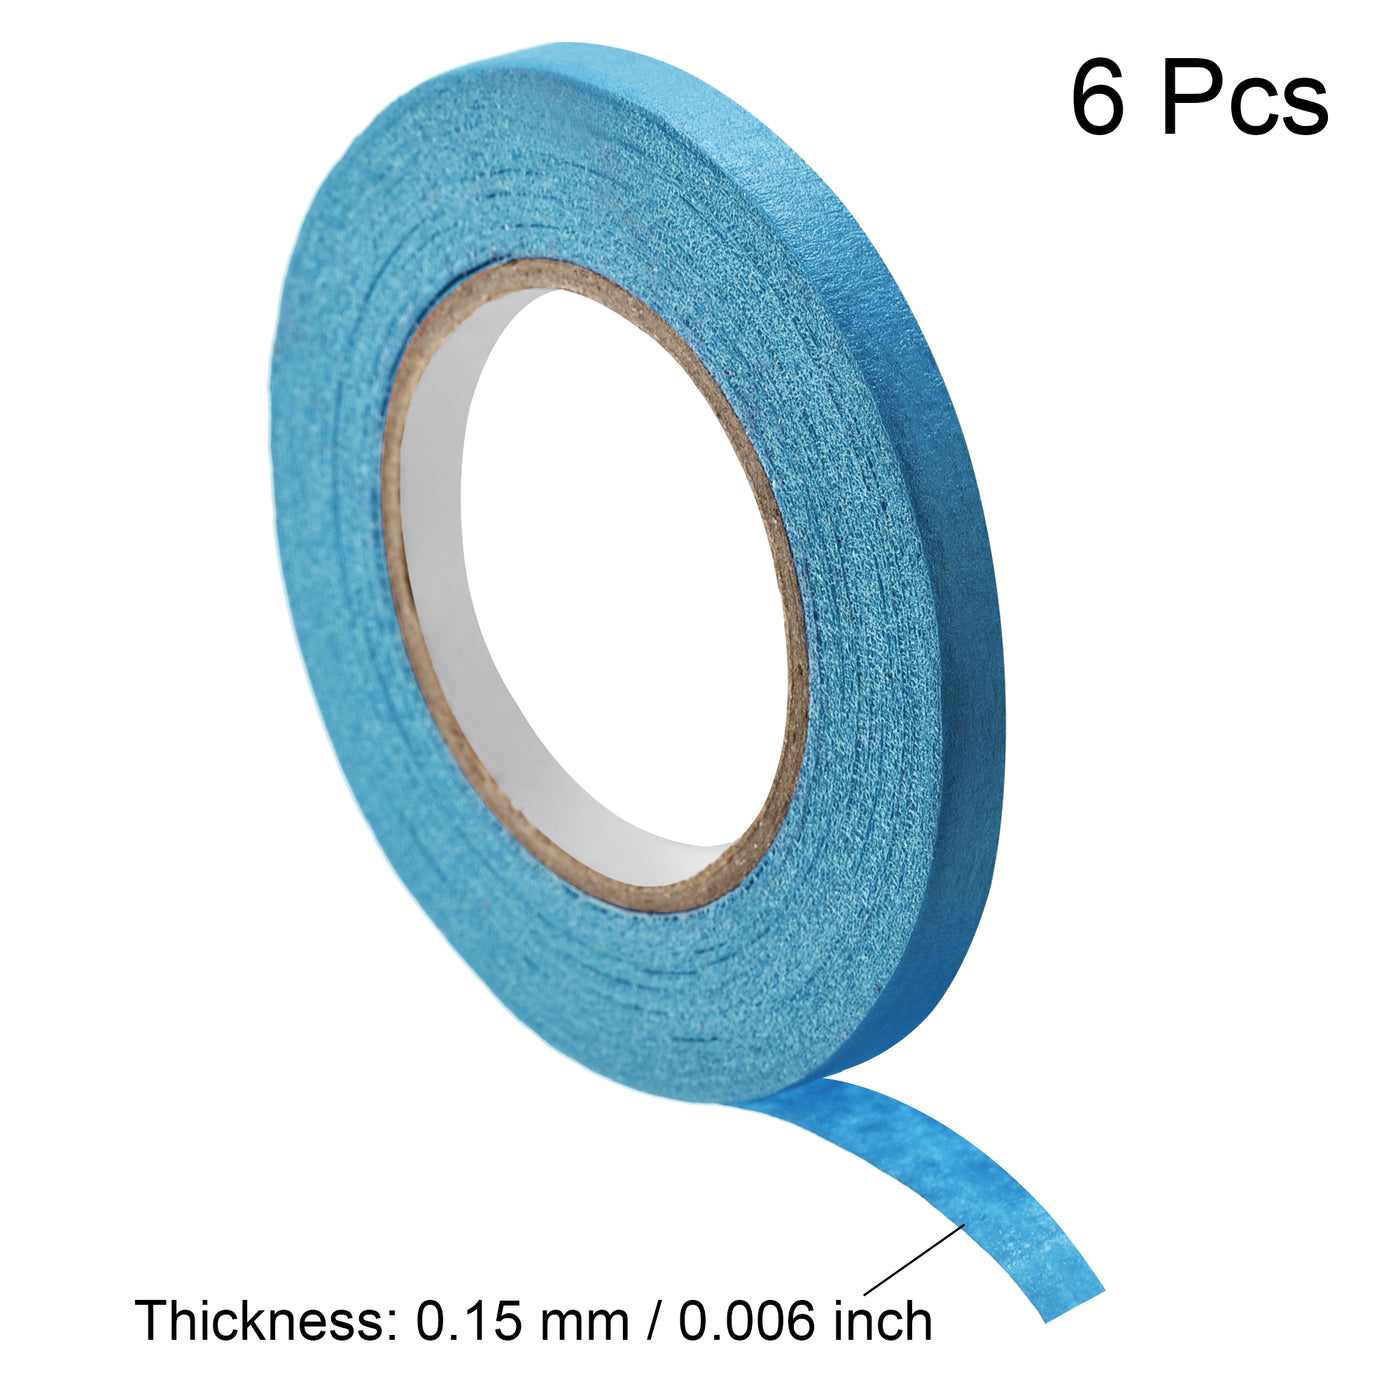 uxcell Uxcell 6Pcs 7mm 0.28 inch Wide 20m 21 Yards Masking Tape Painters Tape Rolls Light Blue